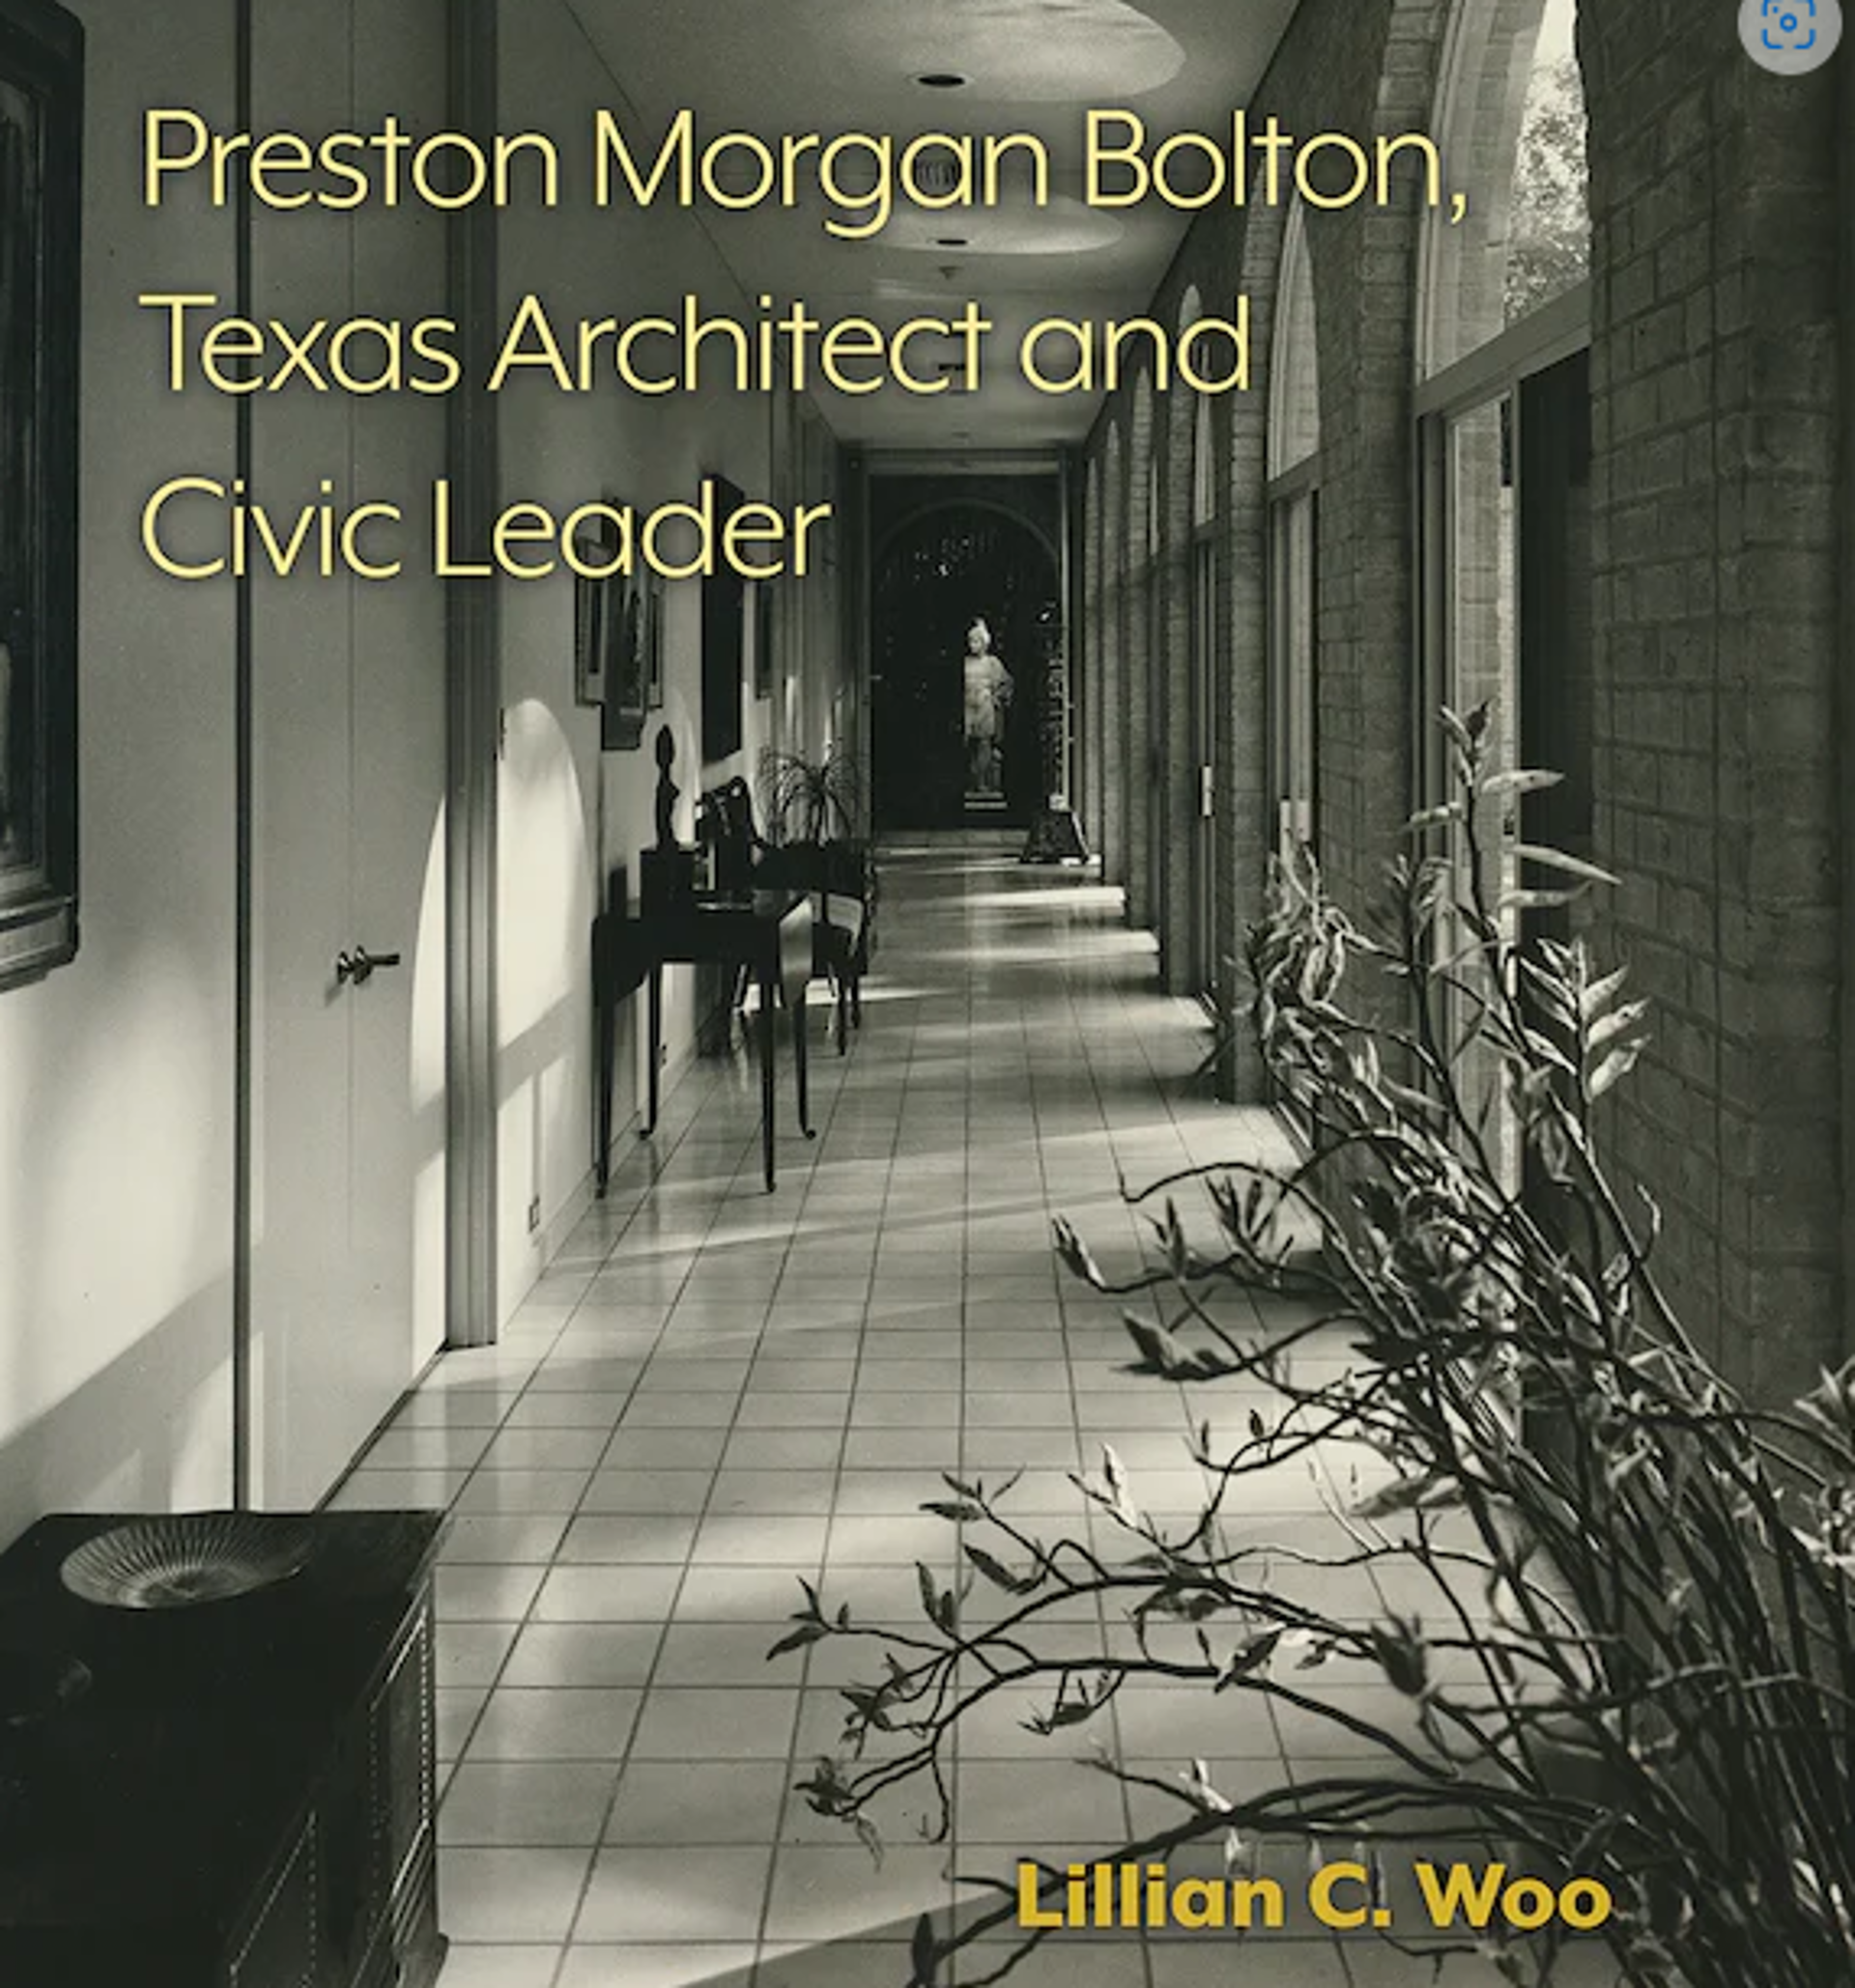 Preston Morgan Bolton, Texas Architect and Civic Leader By Lillian C. Woo by Publications